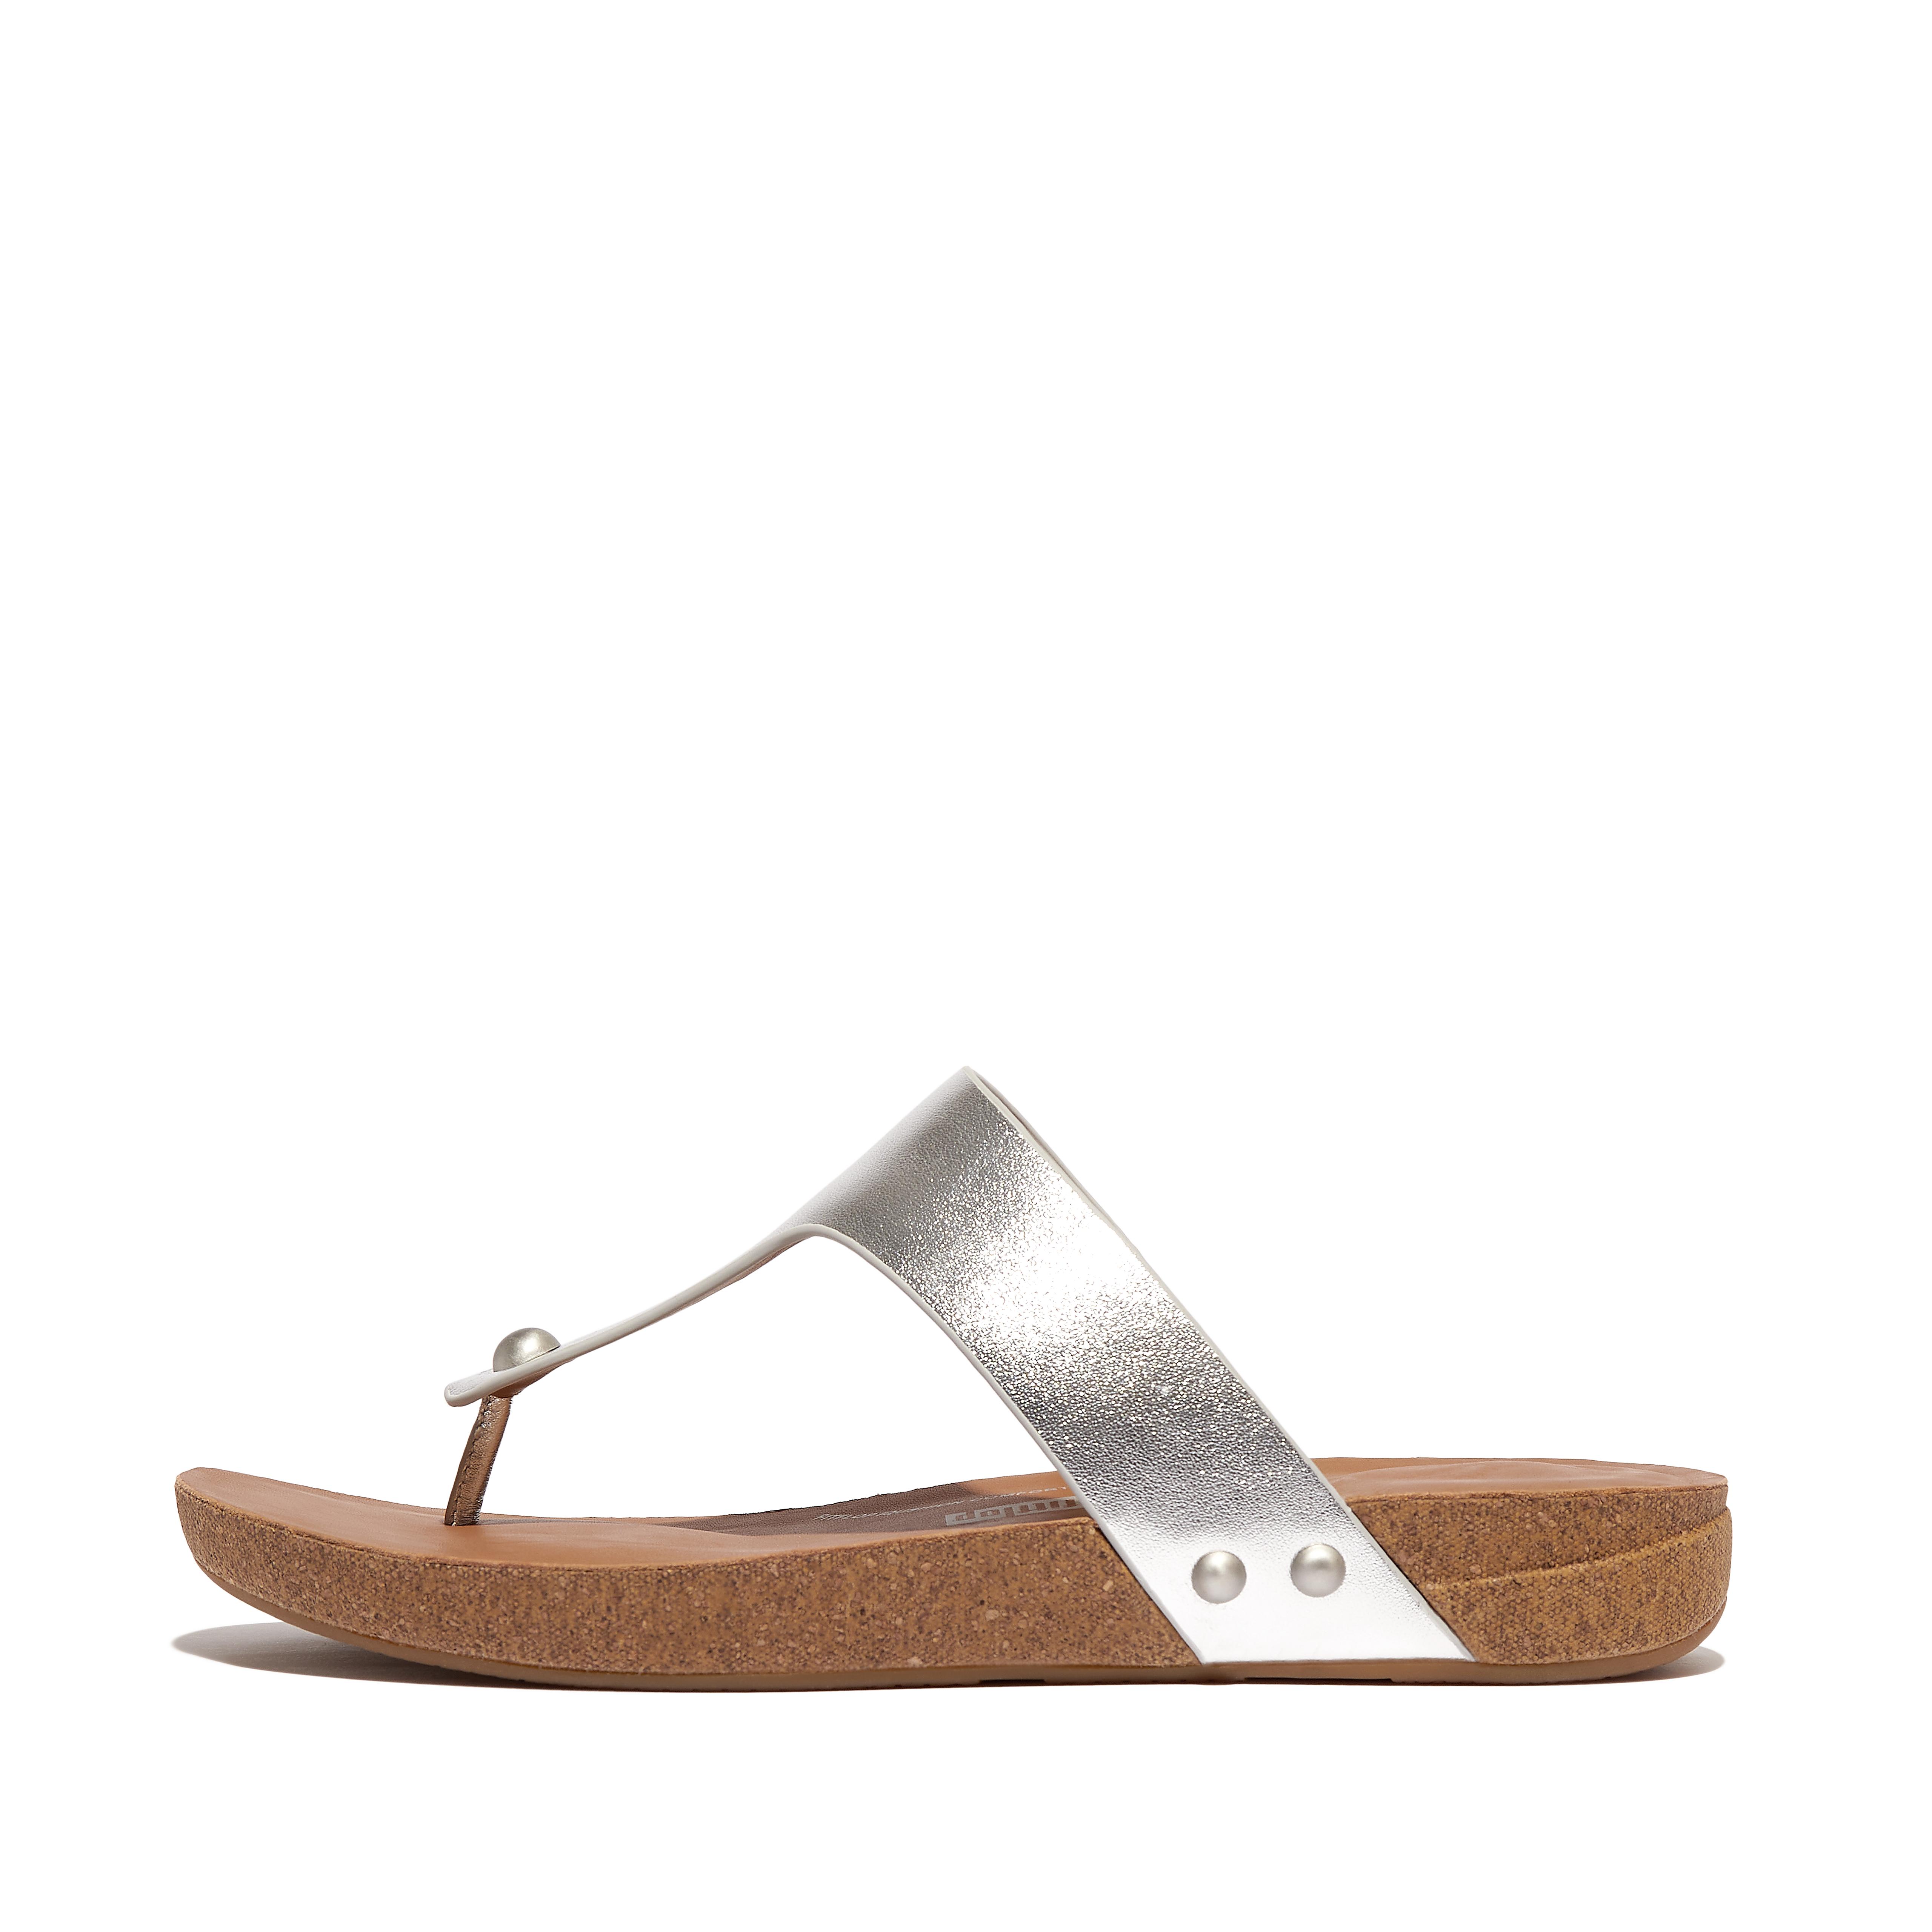 Fitflop Metallic-Leather Toe-Post Sandals,Silver